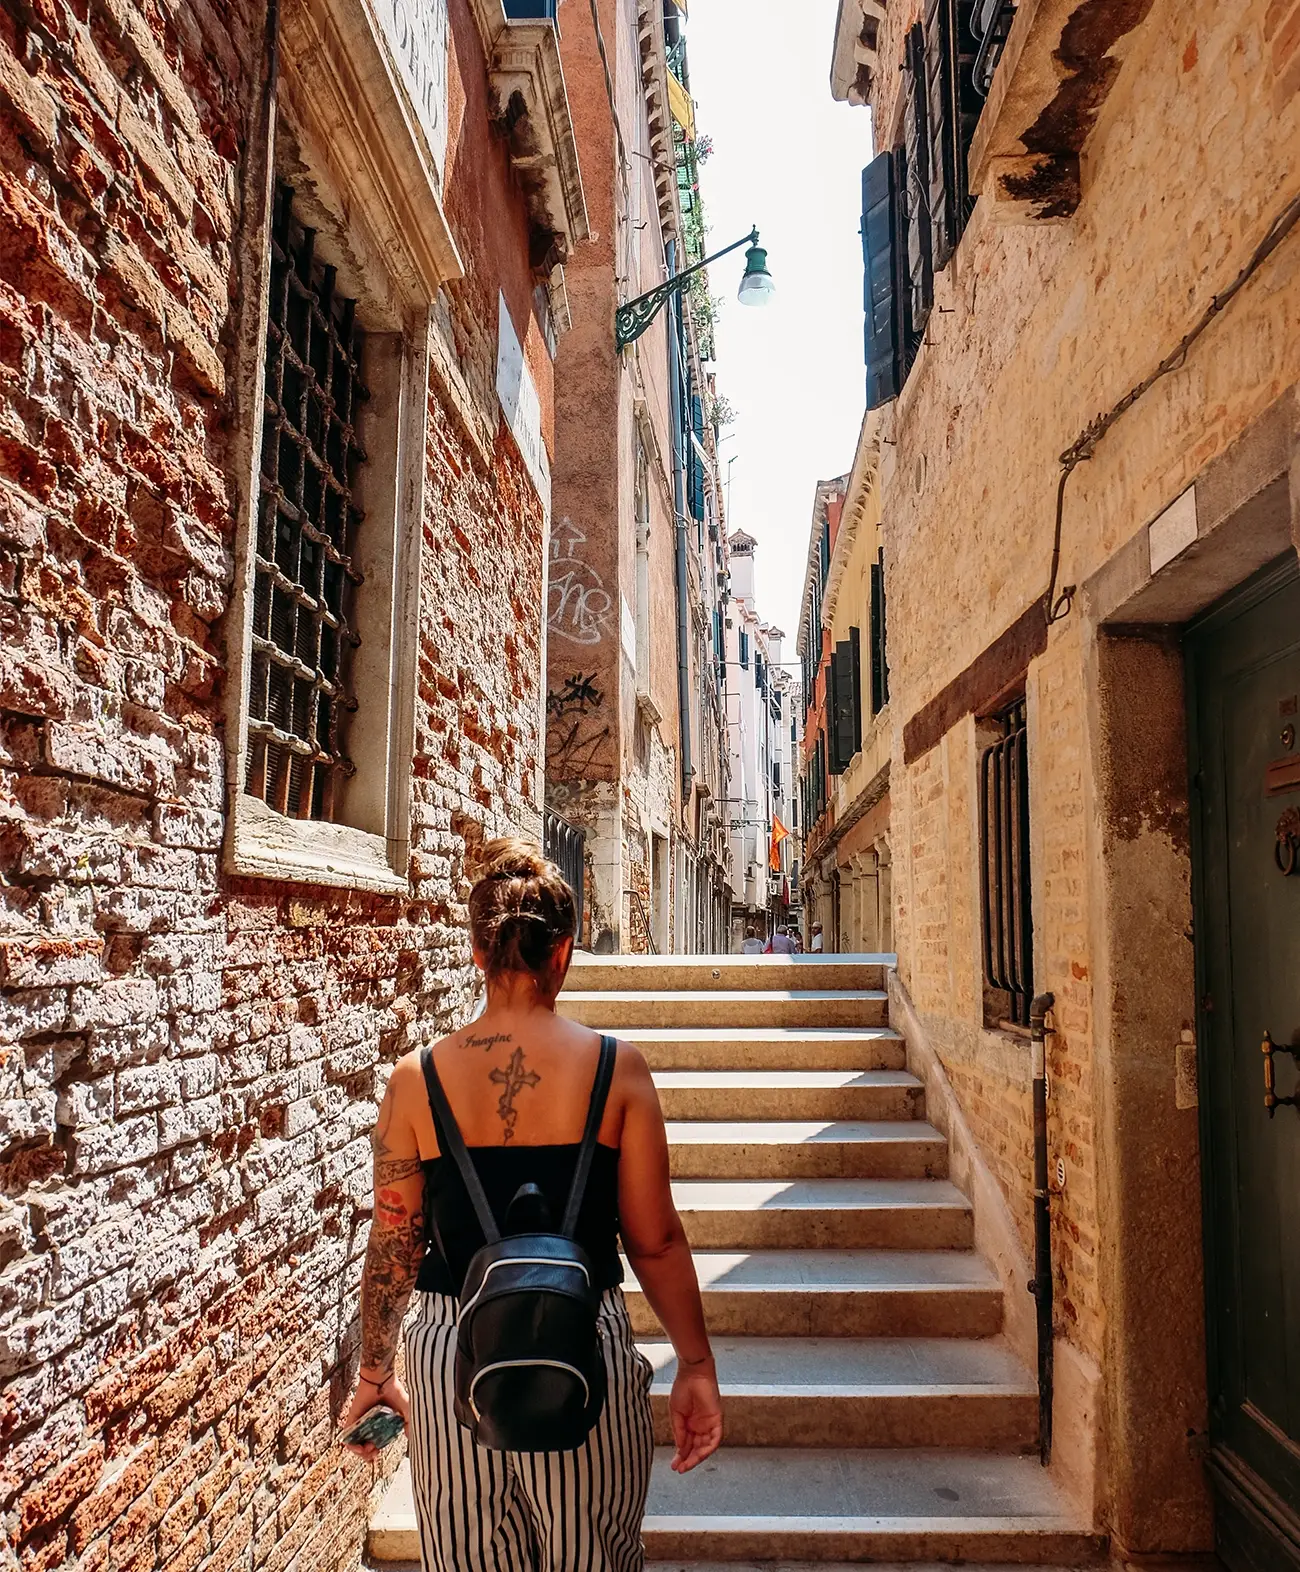 Young millennial woman with a tattoo walking up steps of an old city in Spain.